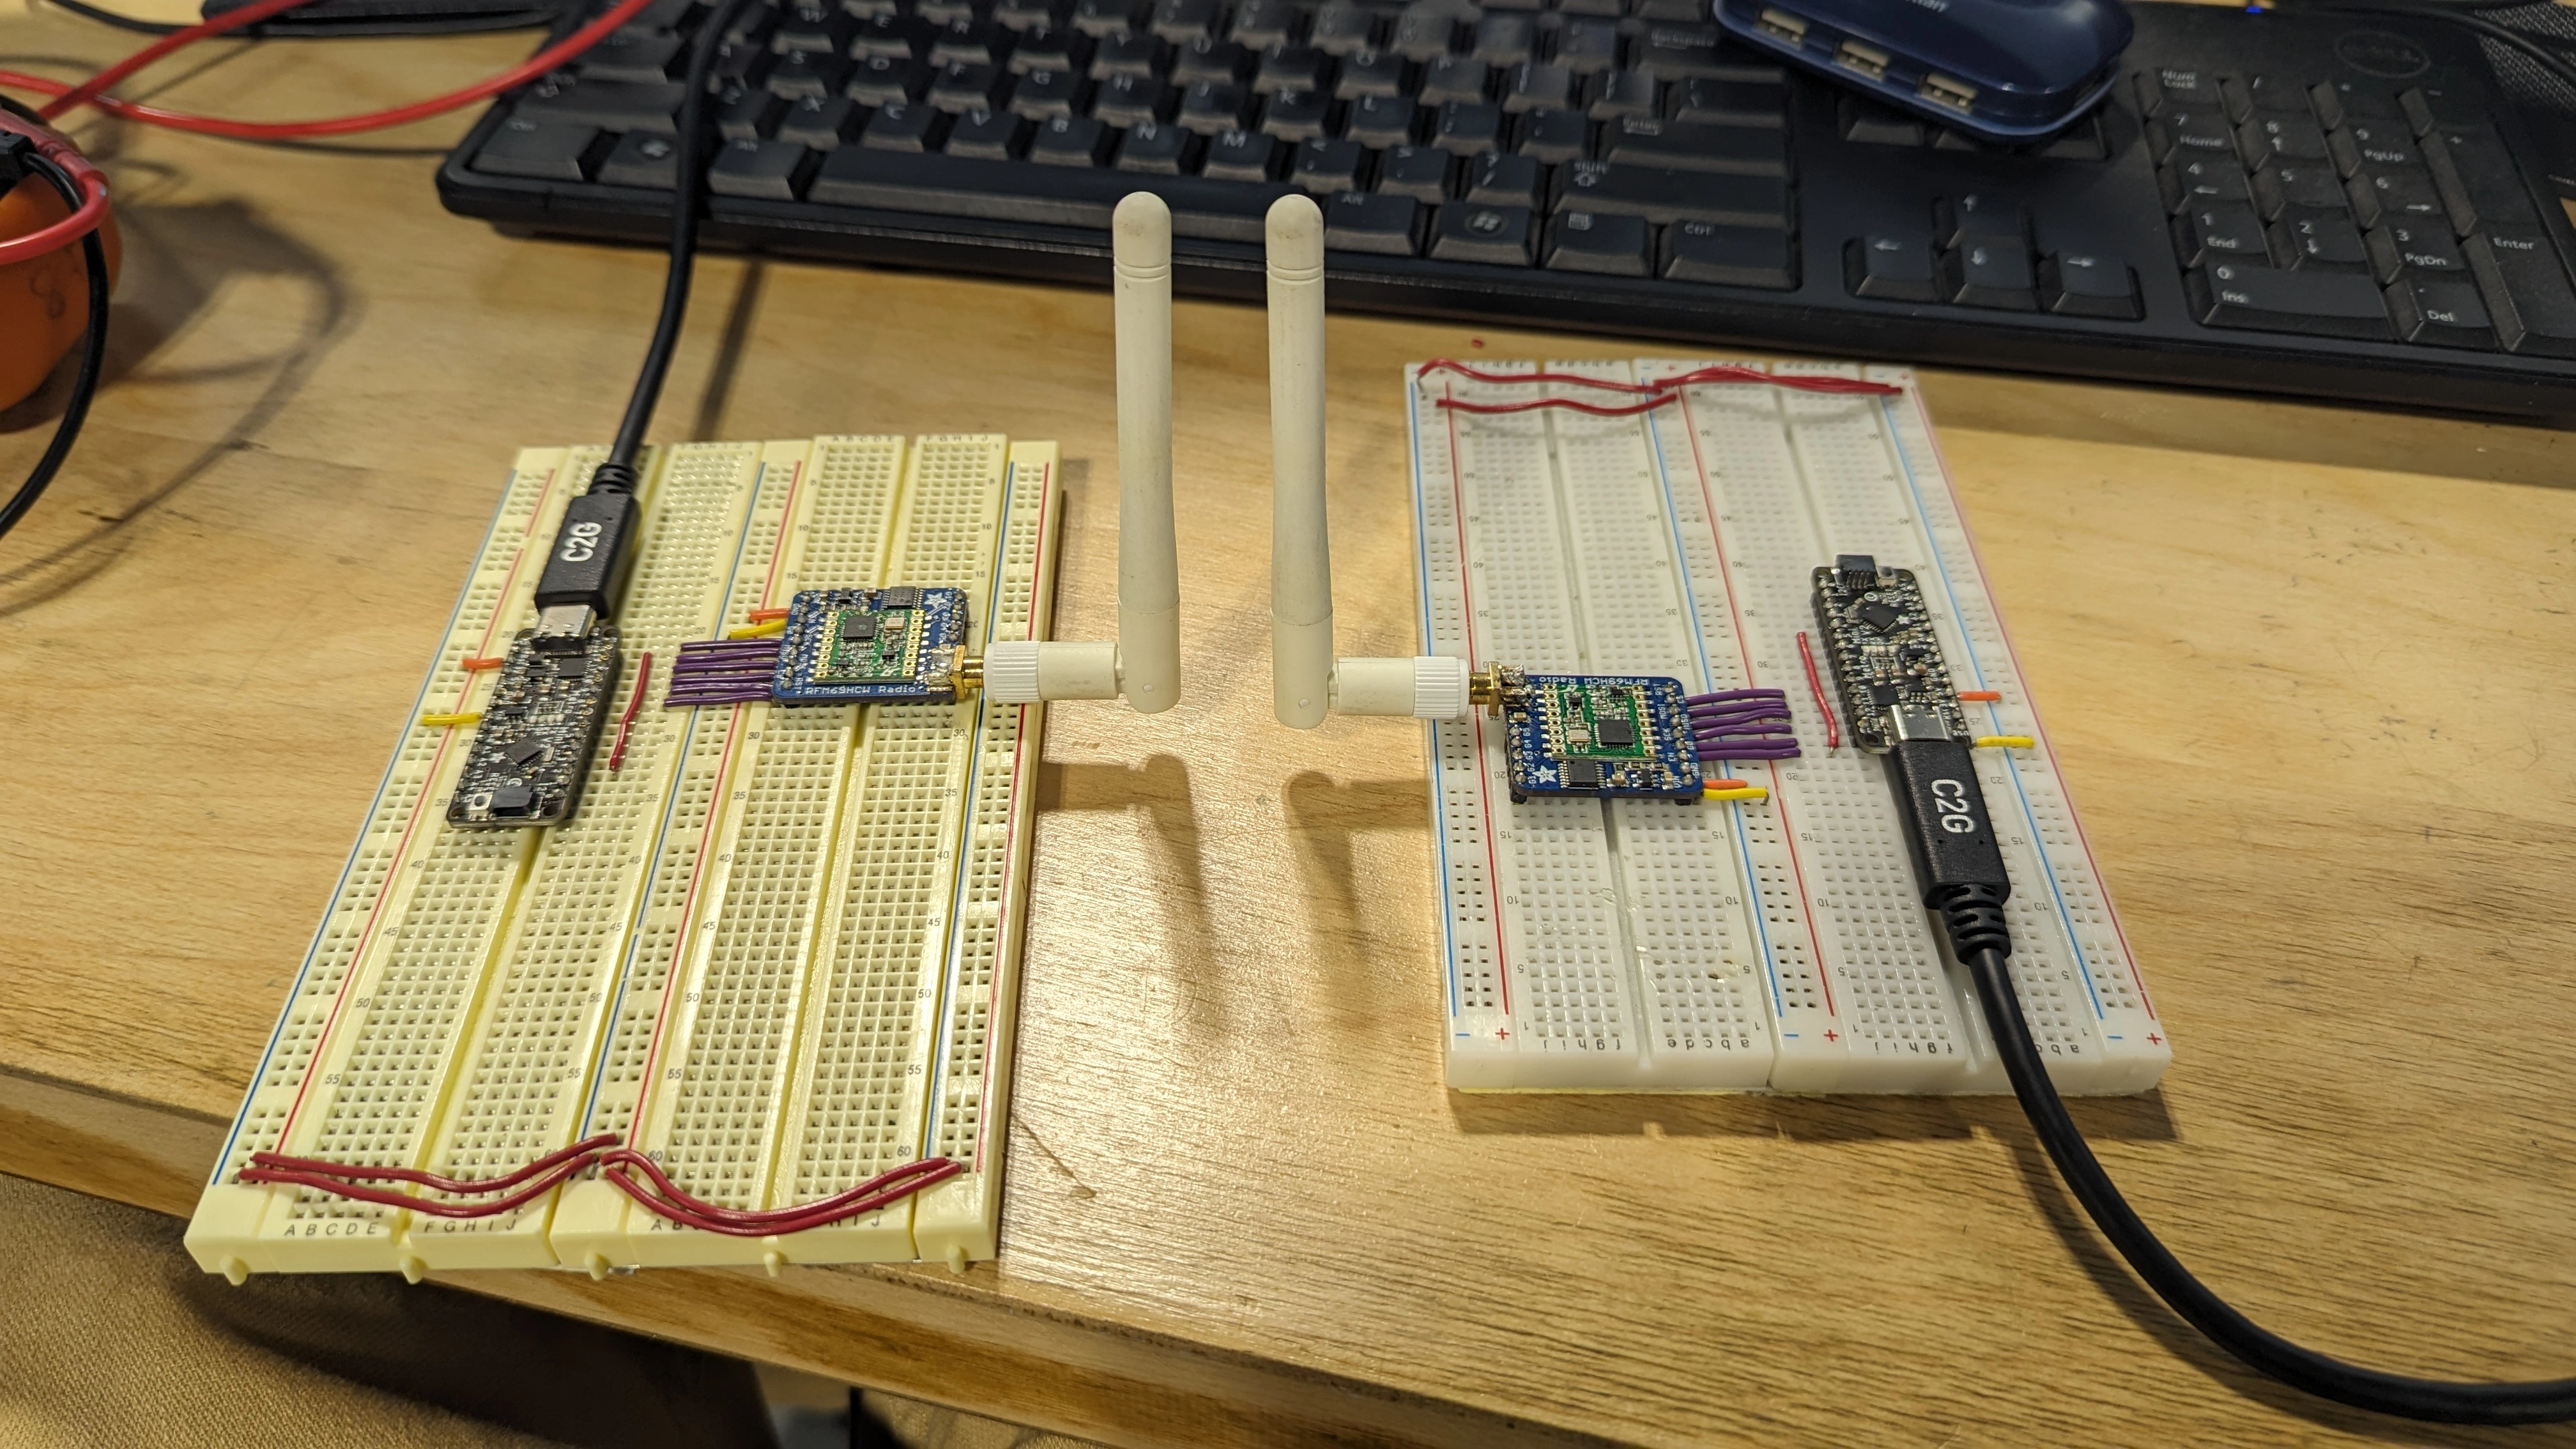 Range test of radios connected to breadboard with anntena attached